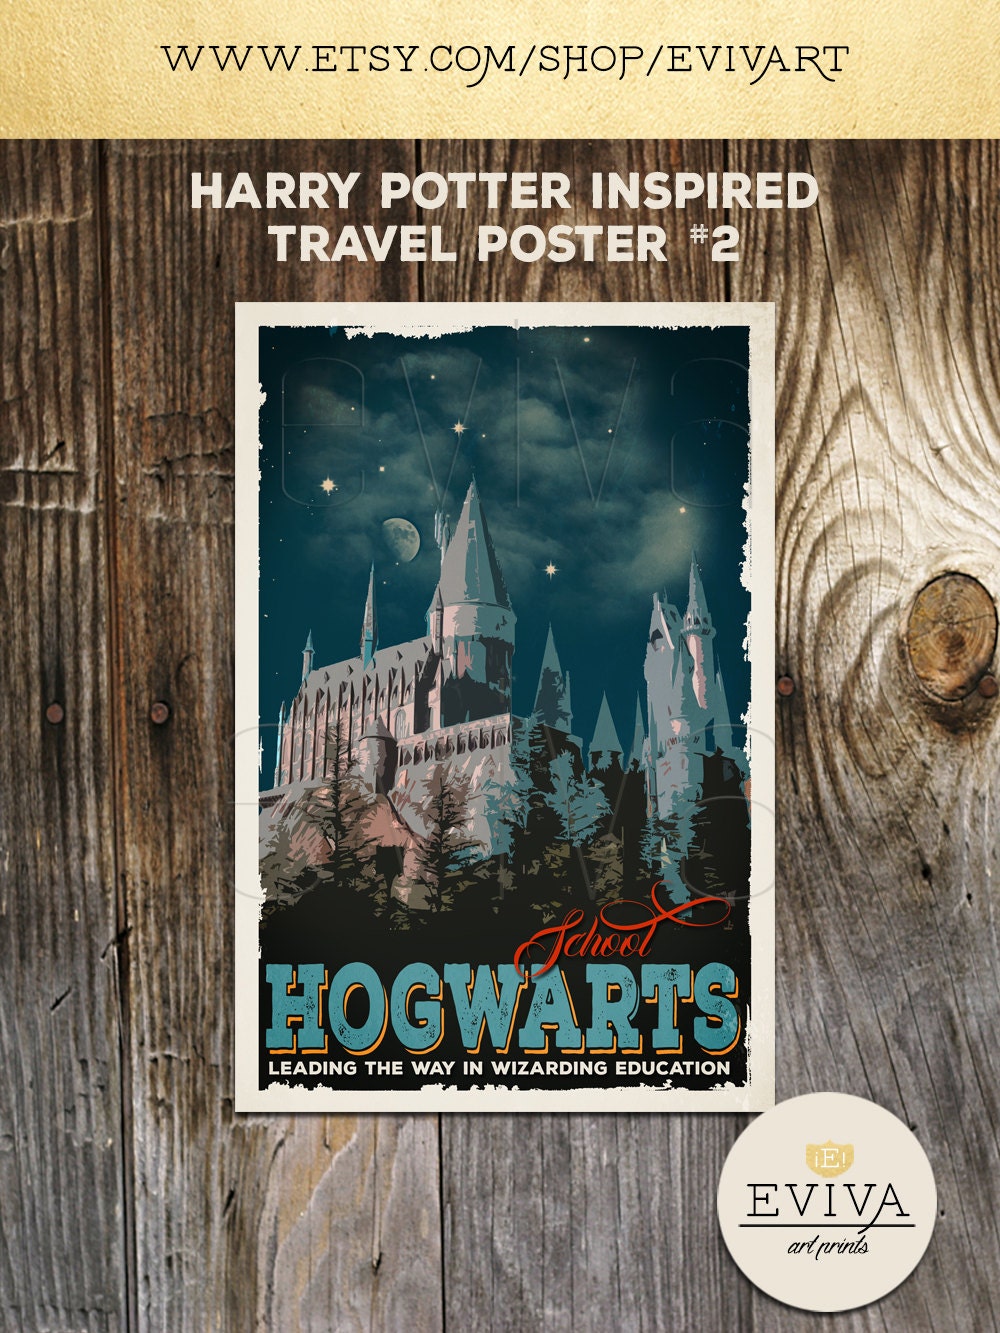 Harry potter movie posters